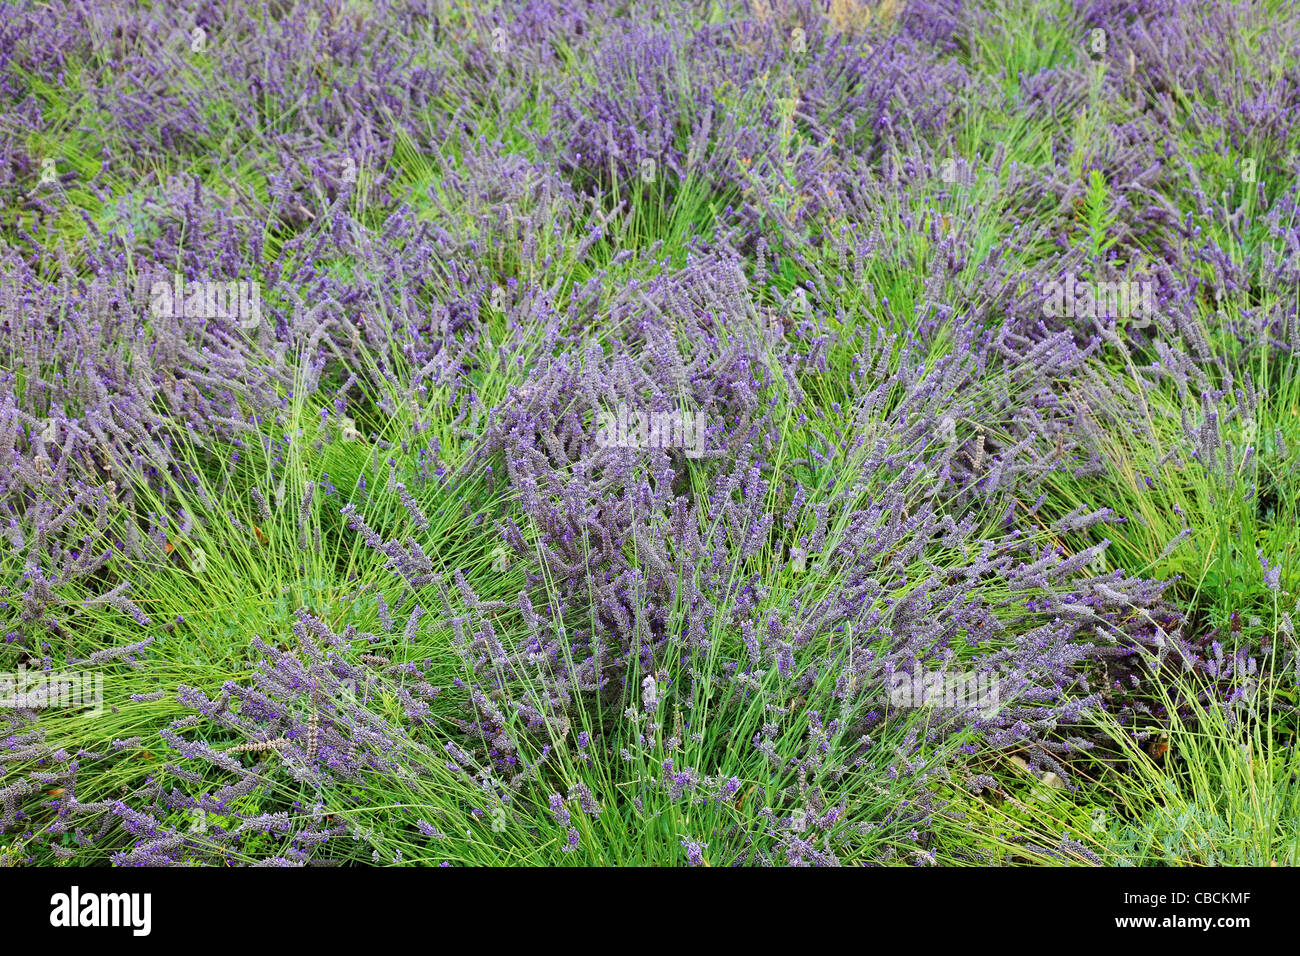 Purple lavender bushes in France, Europe. Stock Photo